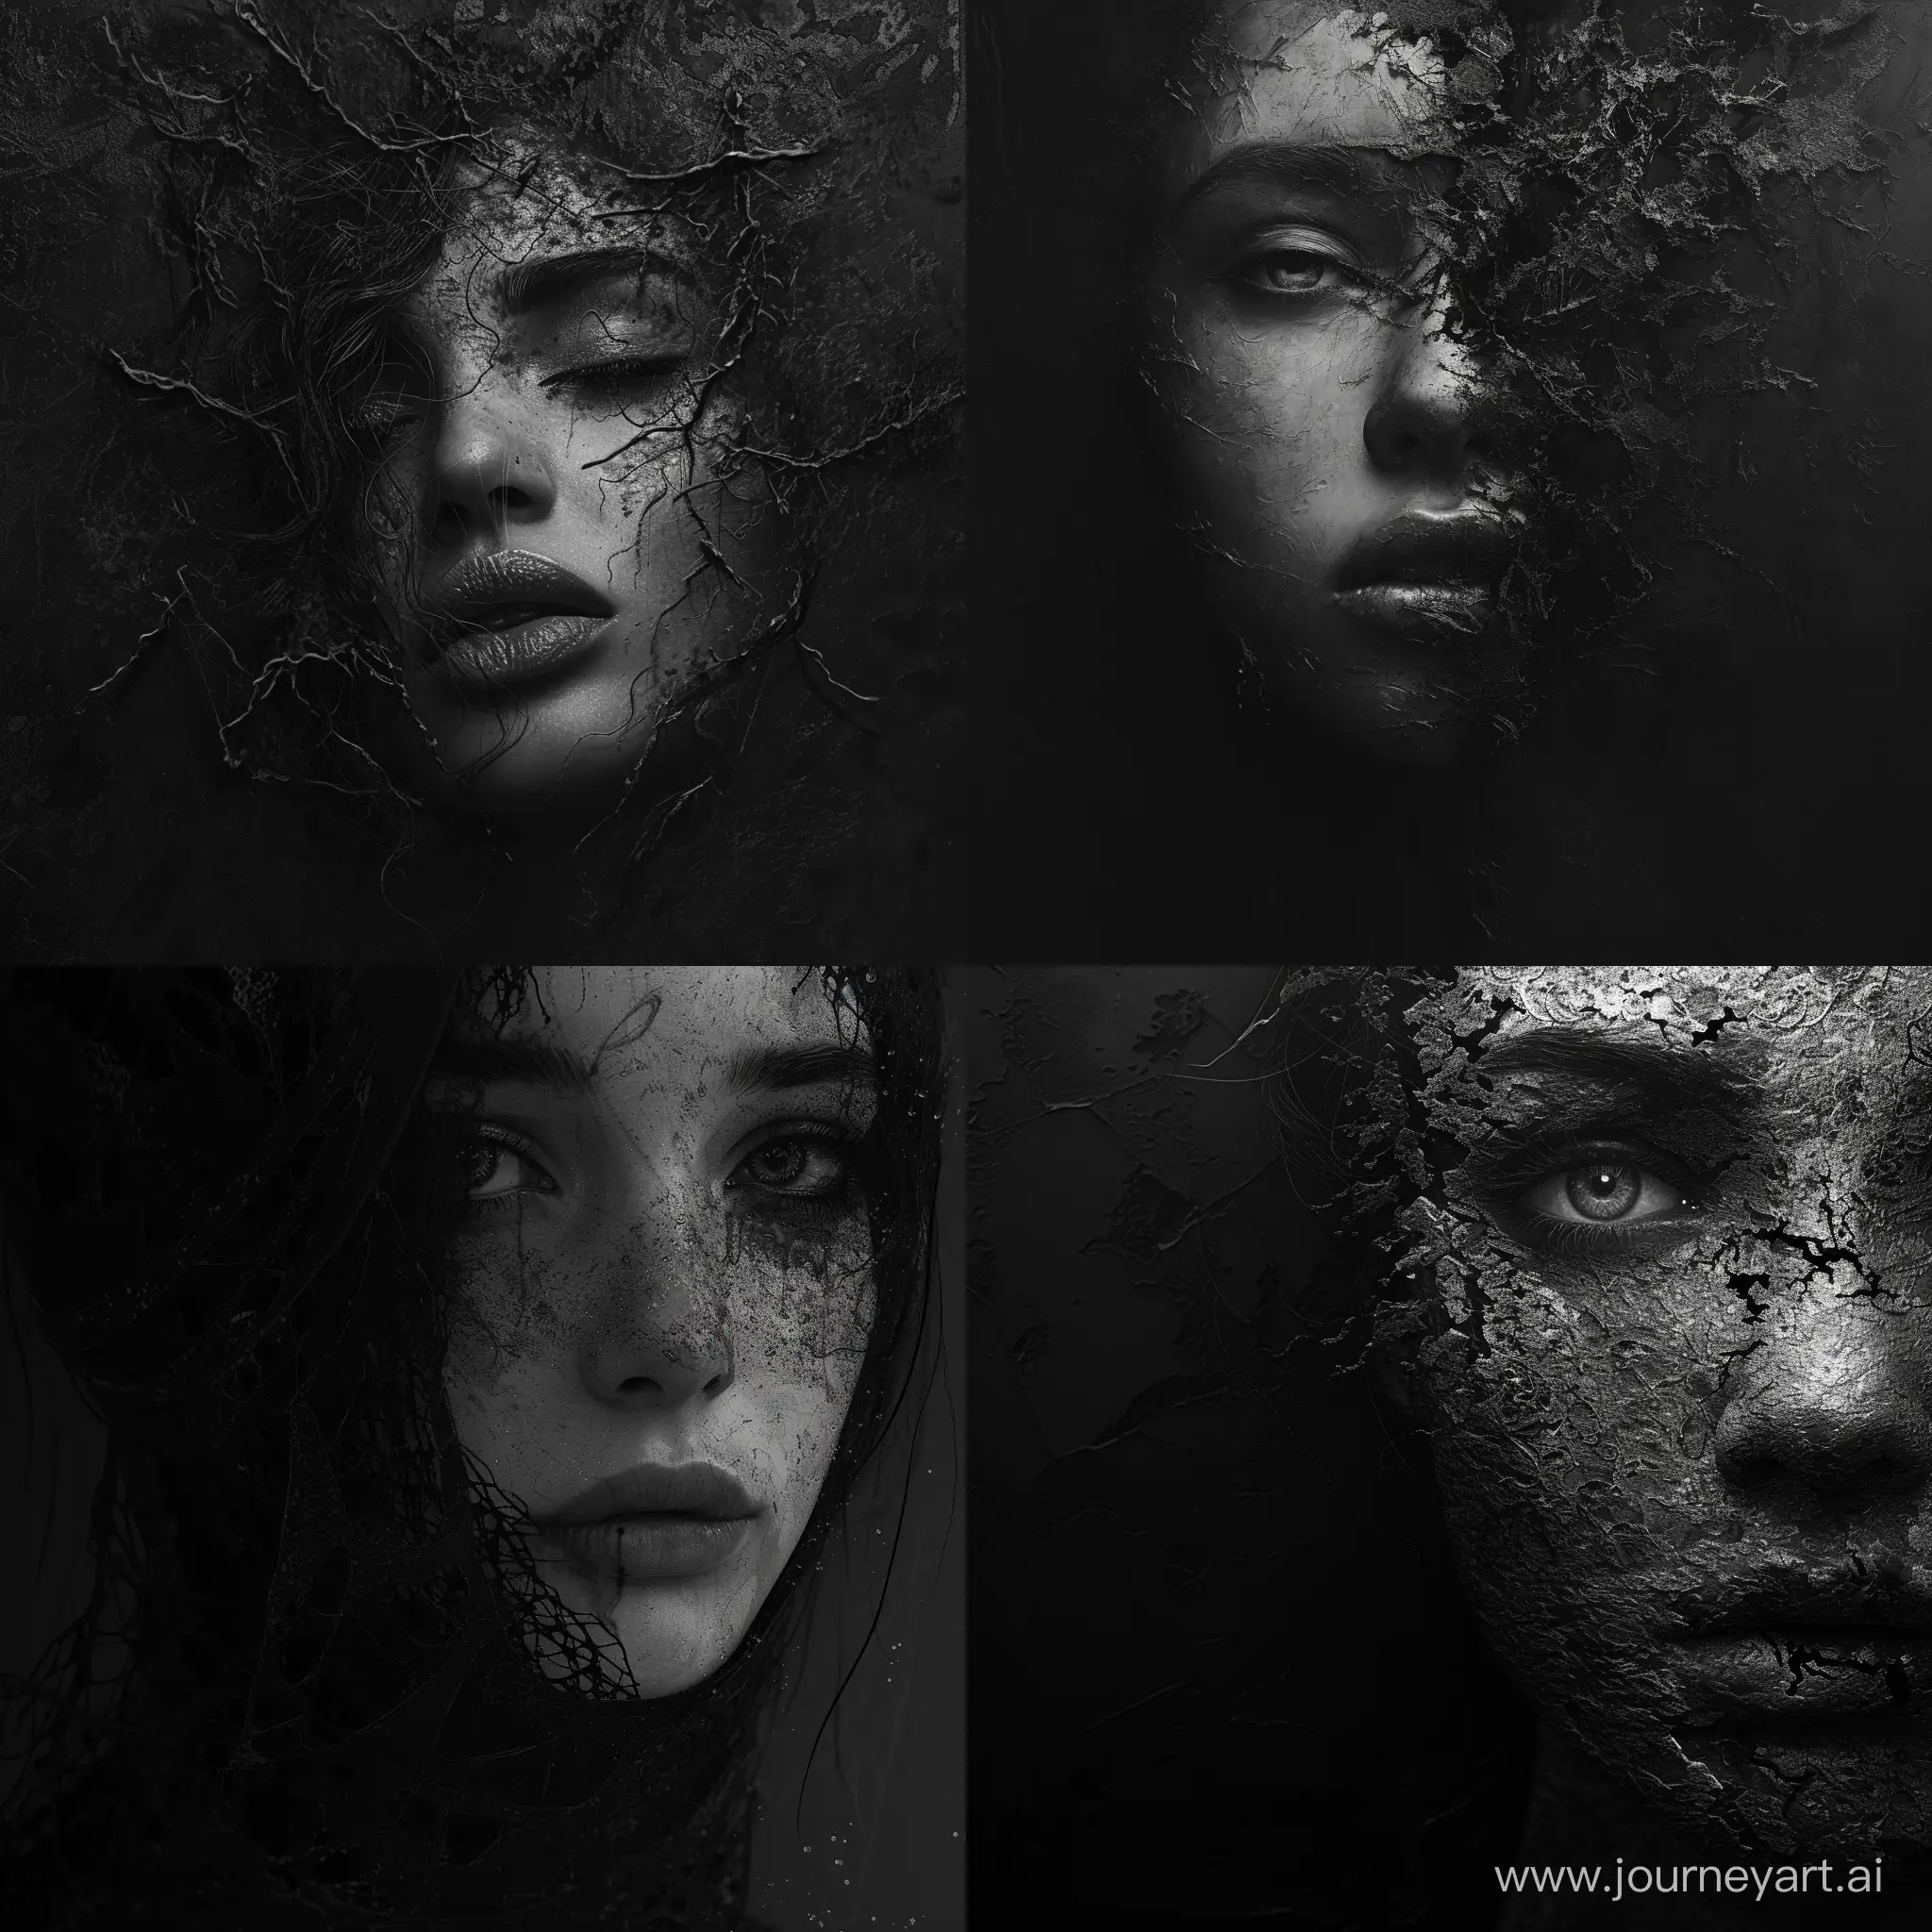 Portrait illustration, digital painting, dark and moody atmosphere, intricate details, high quality, Januz Miralles style, surreal, textured, emotional expression, monochromatic tones, dramatic lighting
